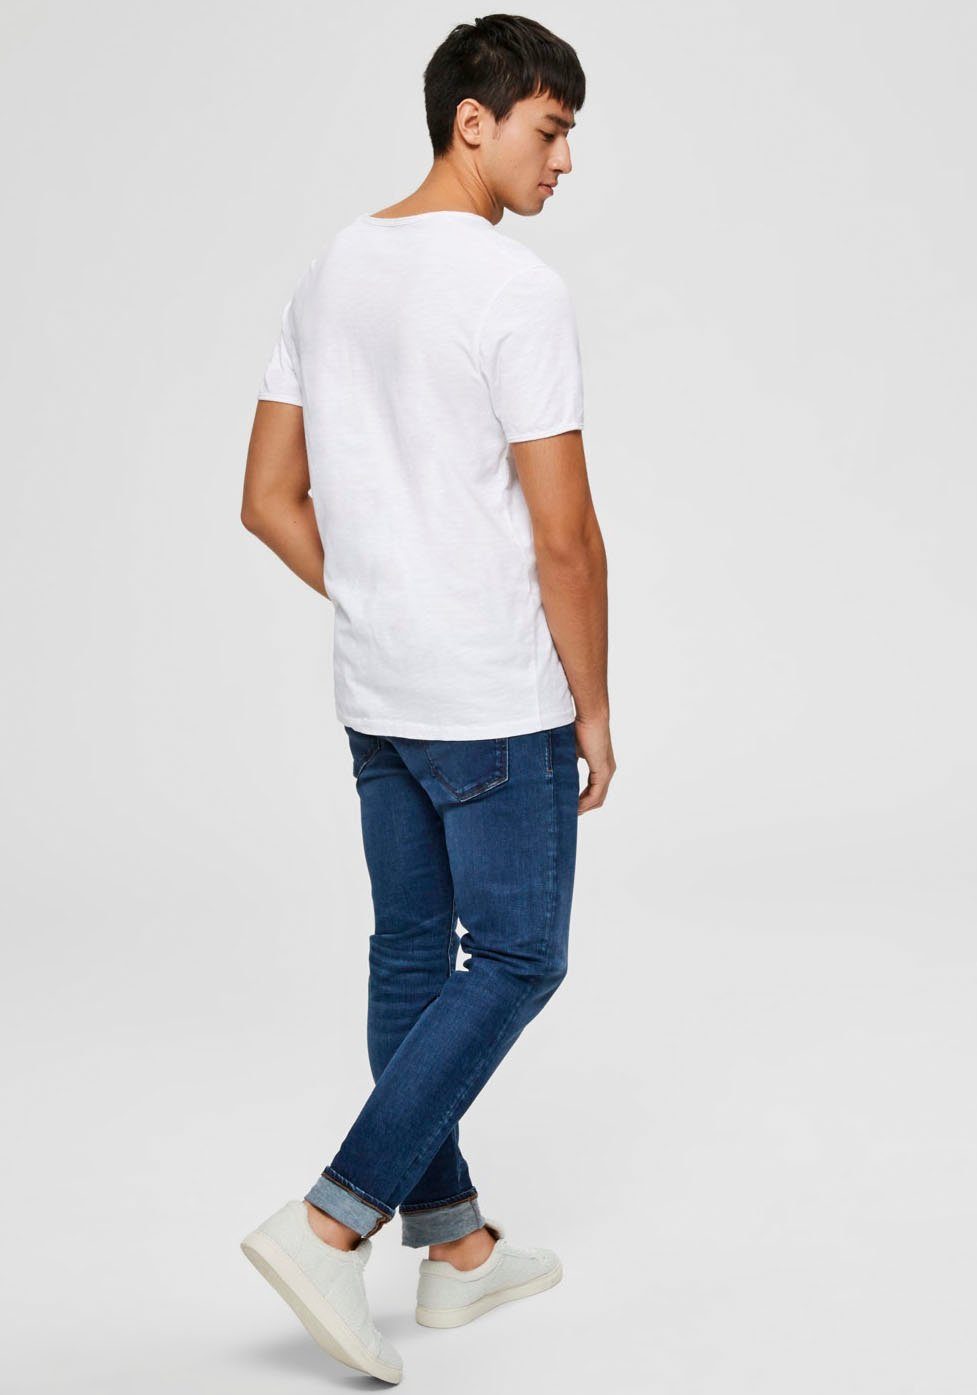 White O-NECK T-Shirt Bright SELECTED MORGAN TEE HOMME